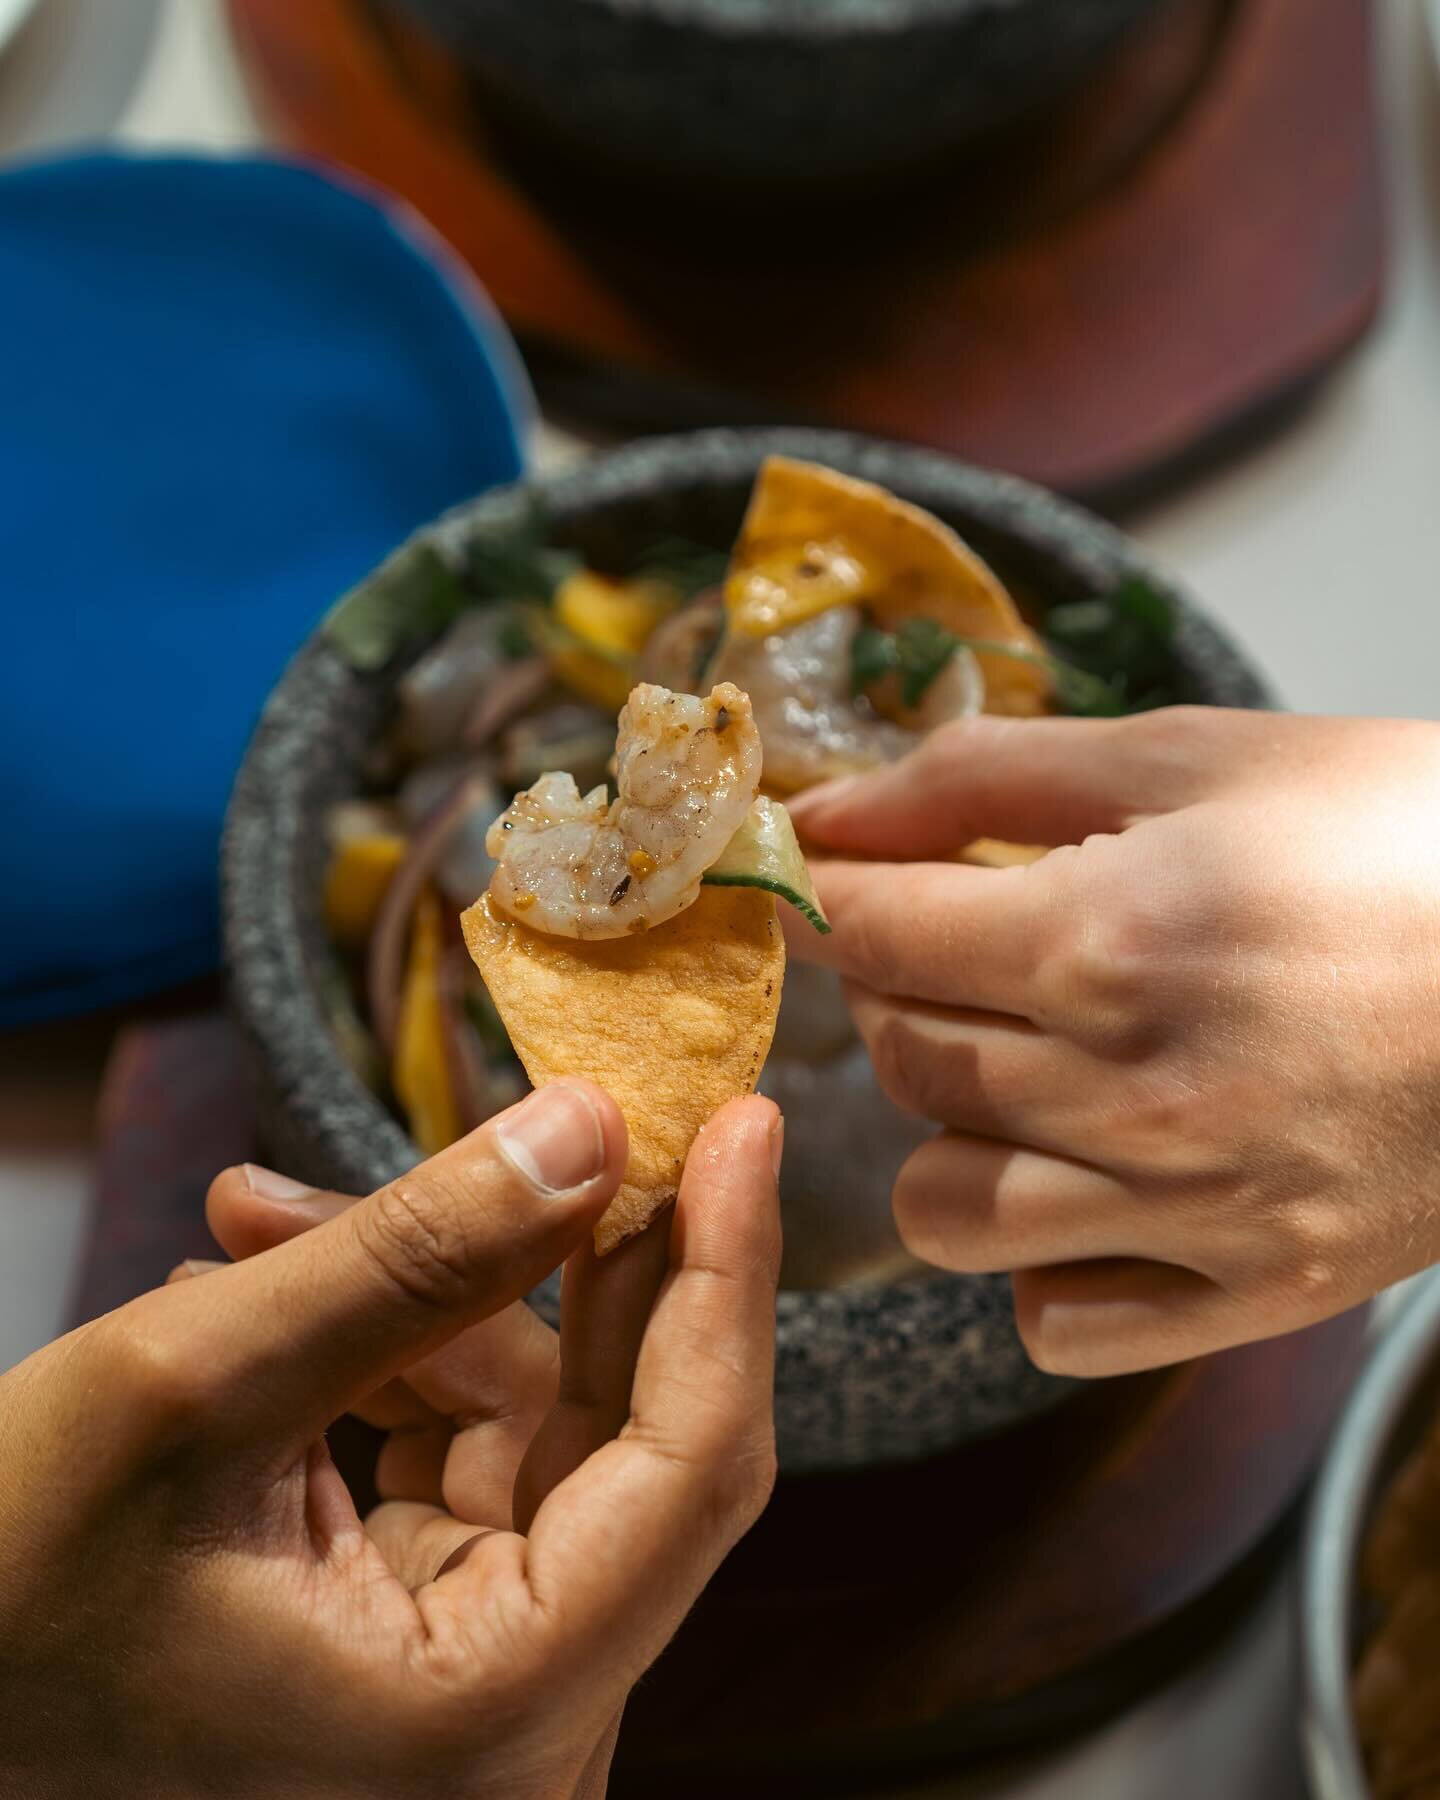 🌮🎉 Exciting News! 🎉🌮 Join us tonight at La Taqueria Brentwood for an unforgettable experience! 😍 Our mouthwatering ceviche is the perfect way to kick off the evening. 🍤 And from 6-8, right in front of the restaurant, @the.amazing.brentwood is h